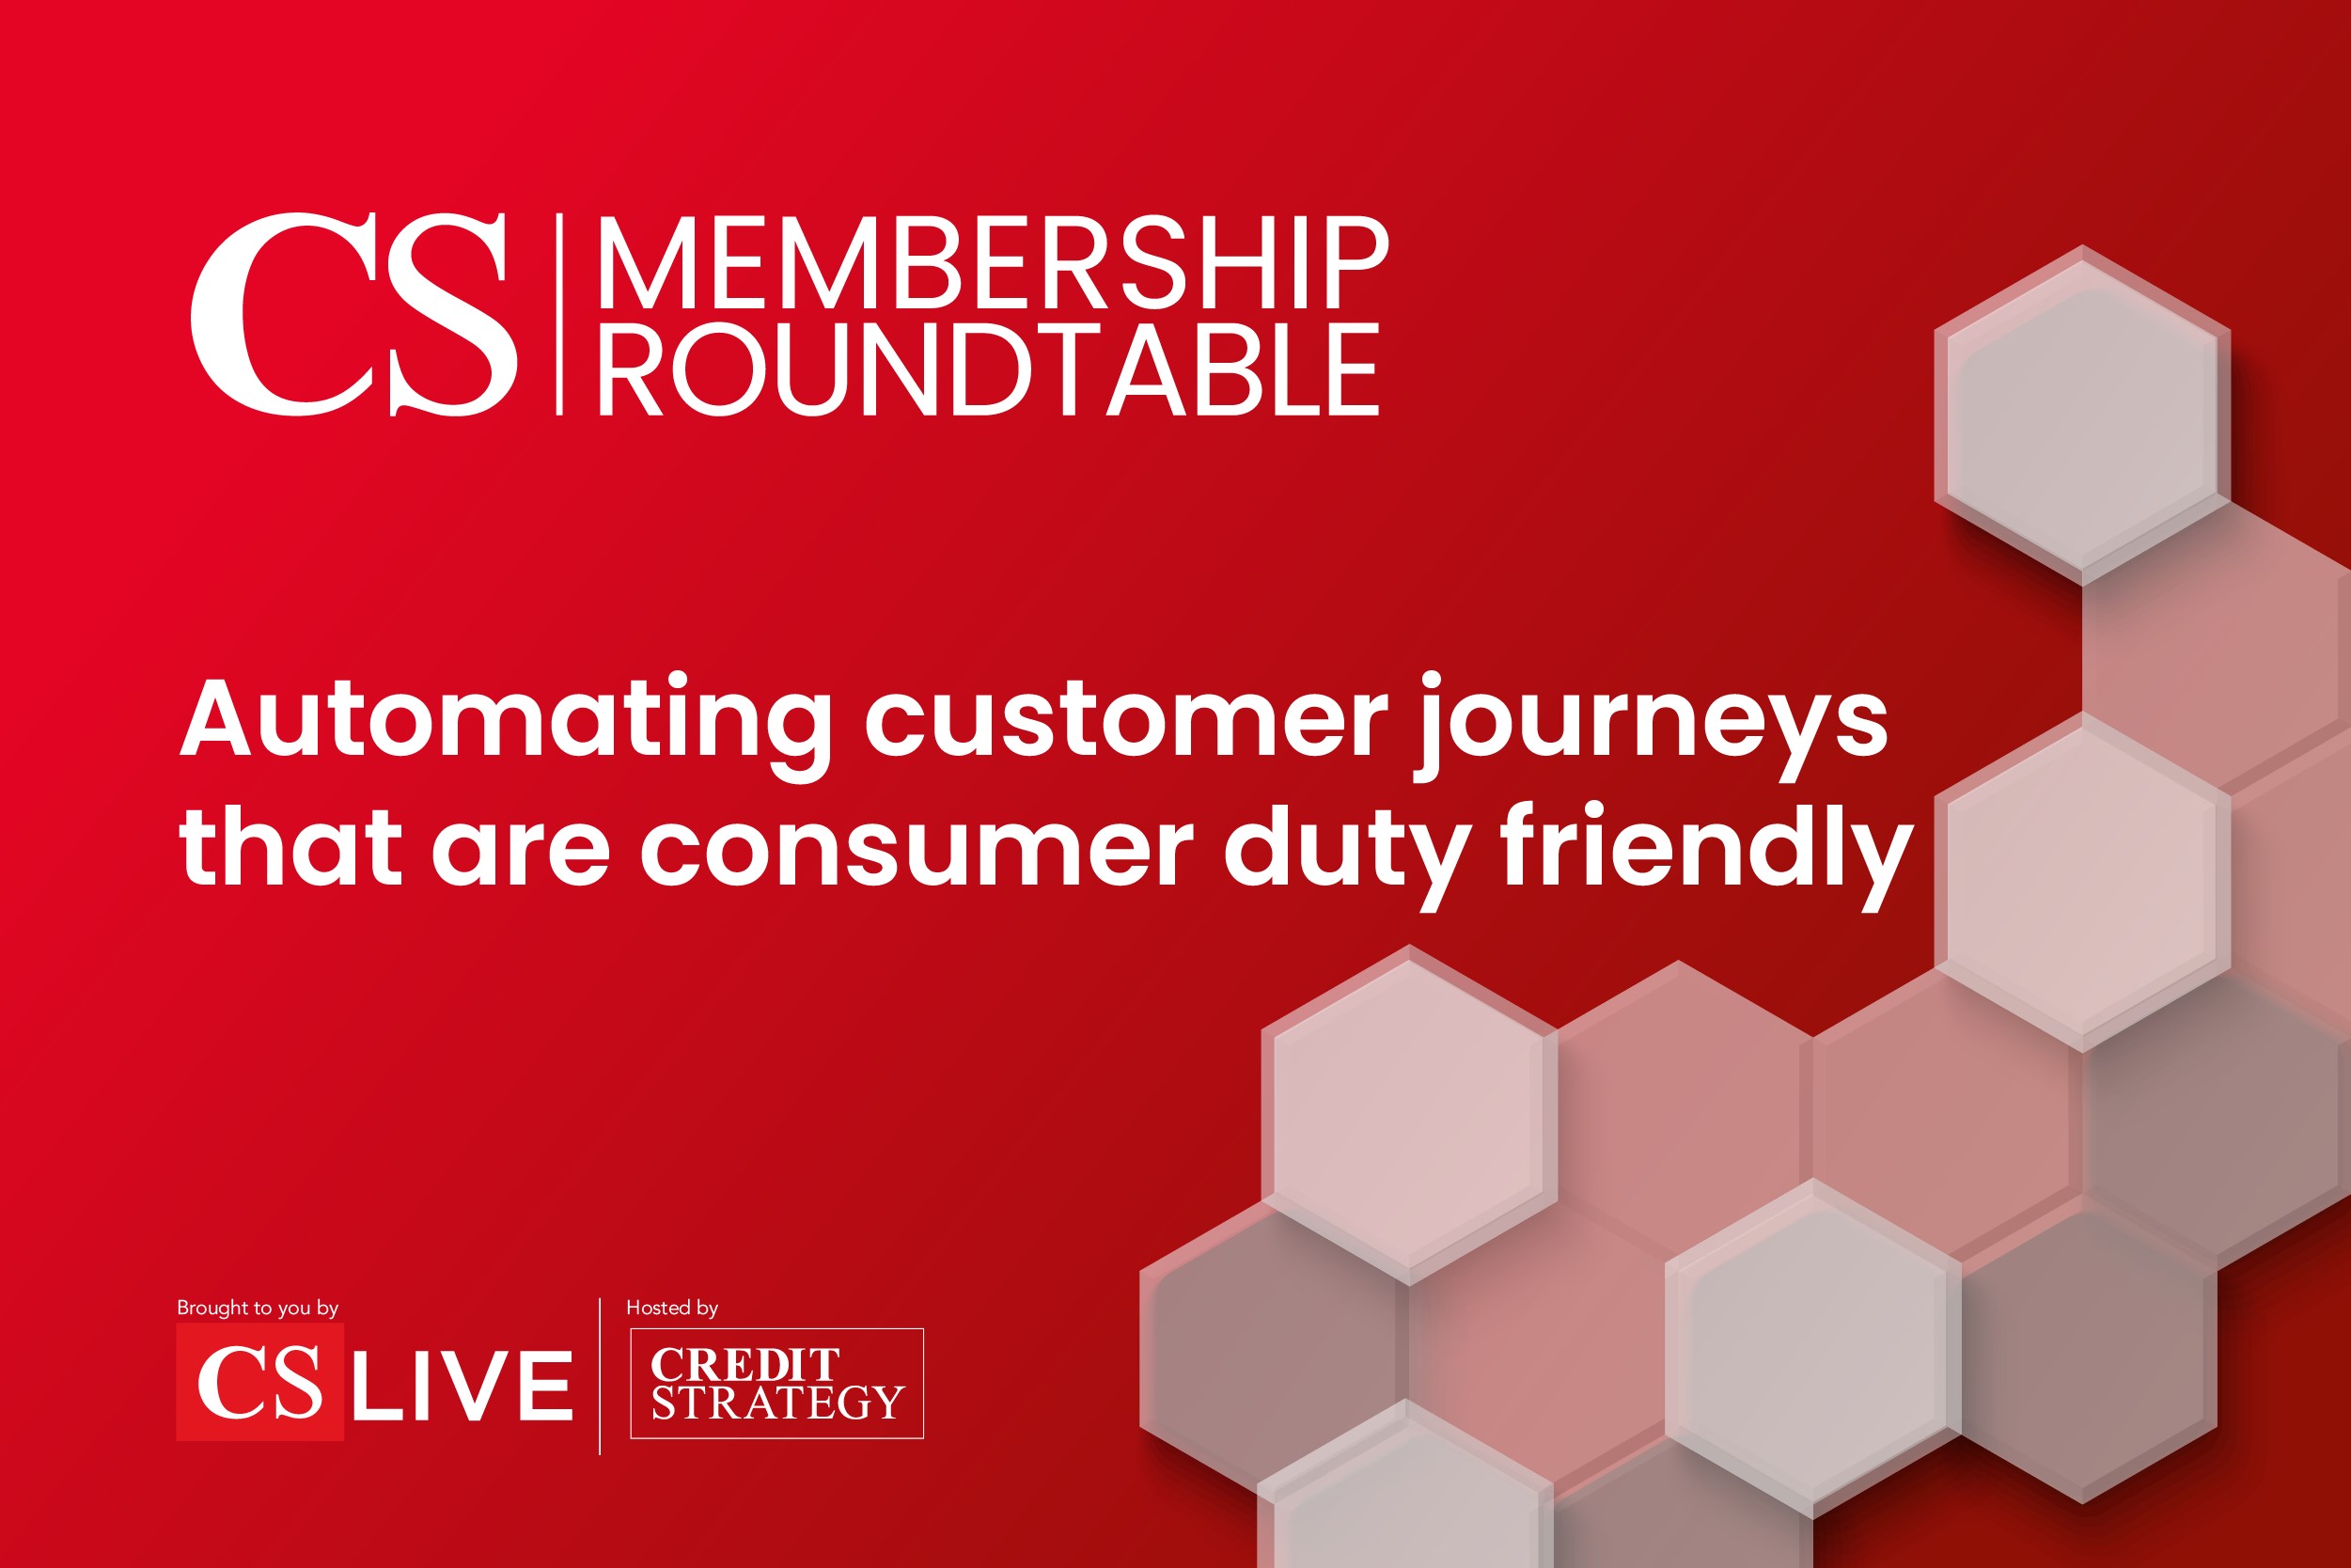 Automating customer journeys that are consumer duty friendly